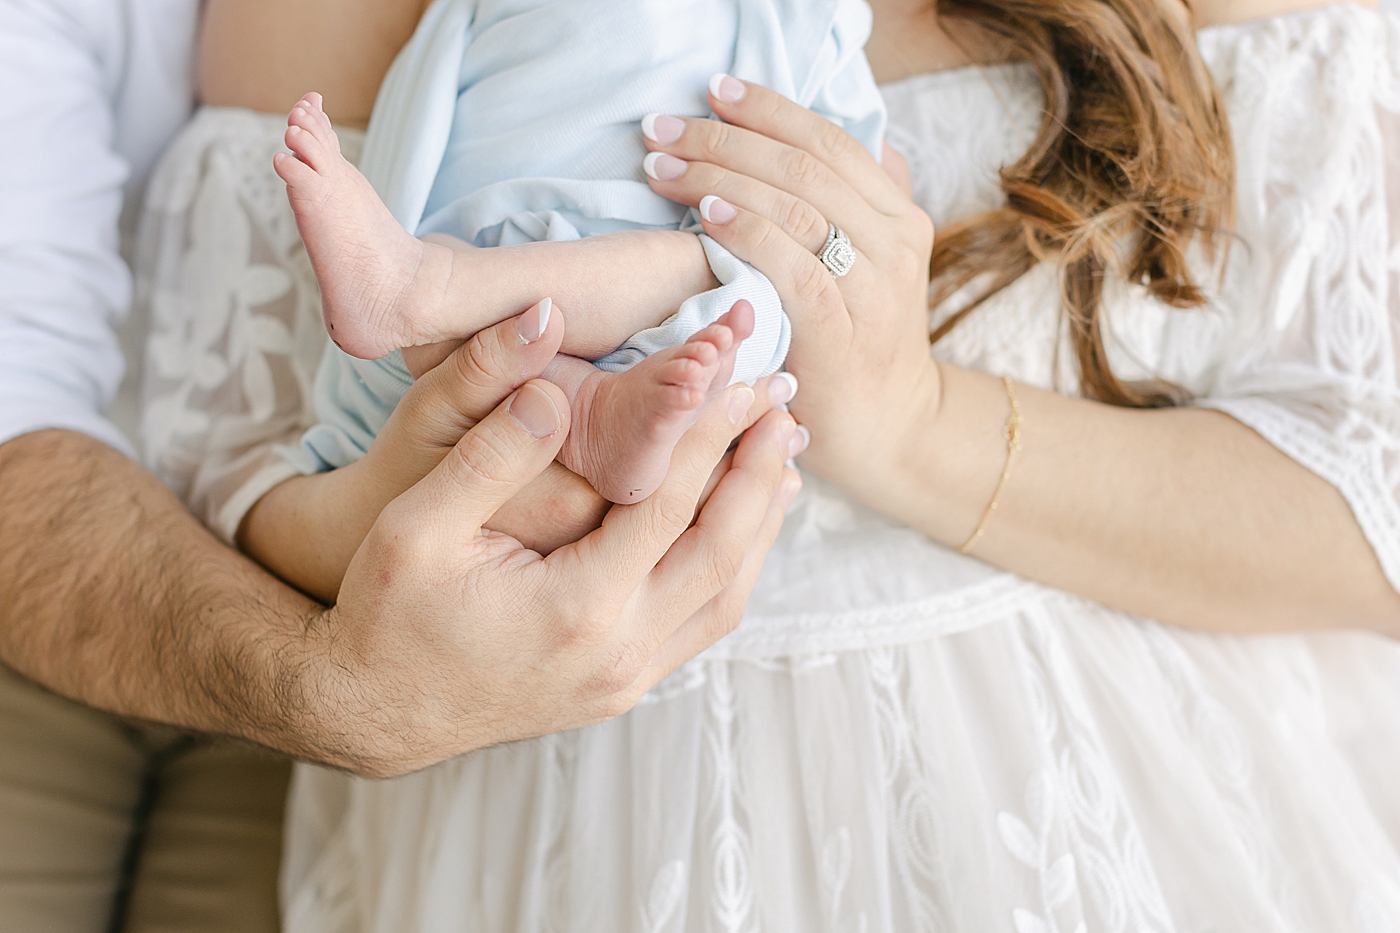 Detail of mom and dad's hands holding their newborn baby | Image by Sana Ahmed Photography 